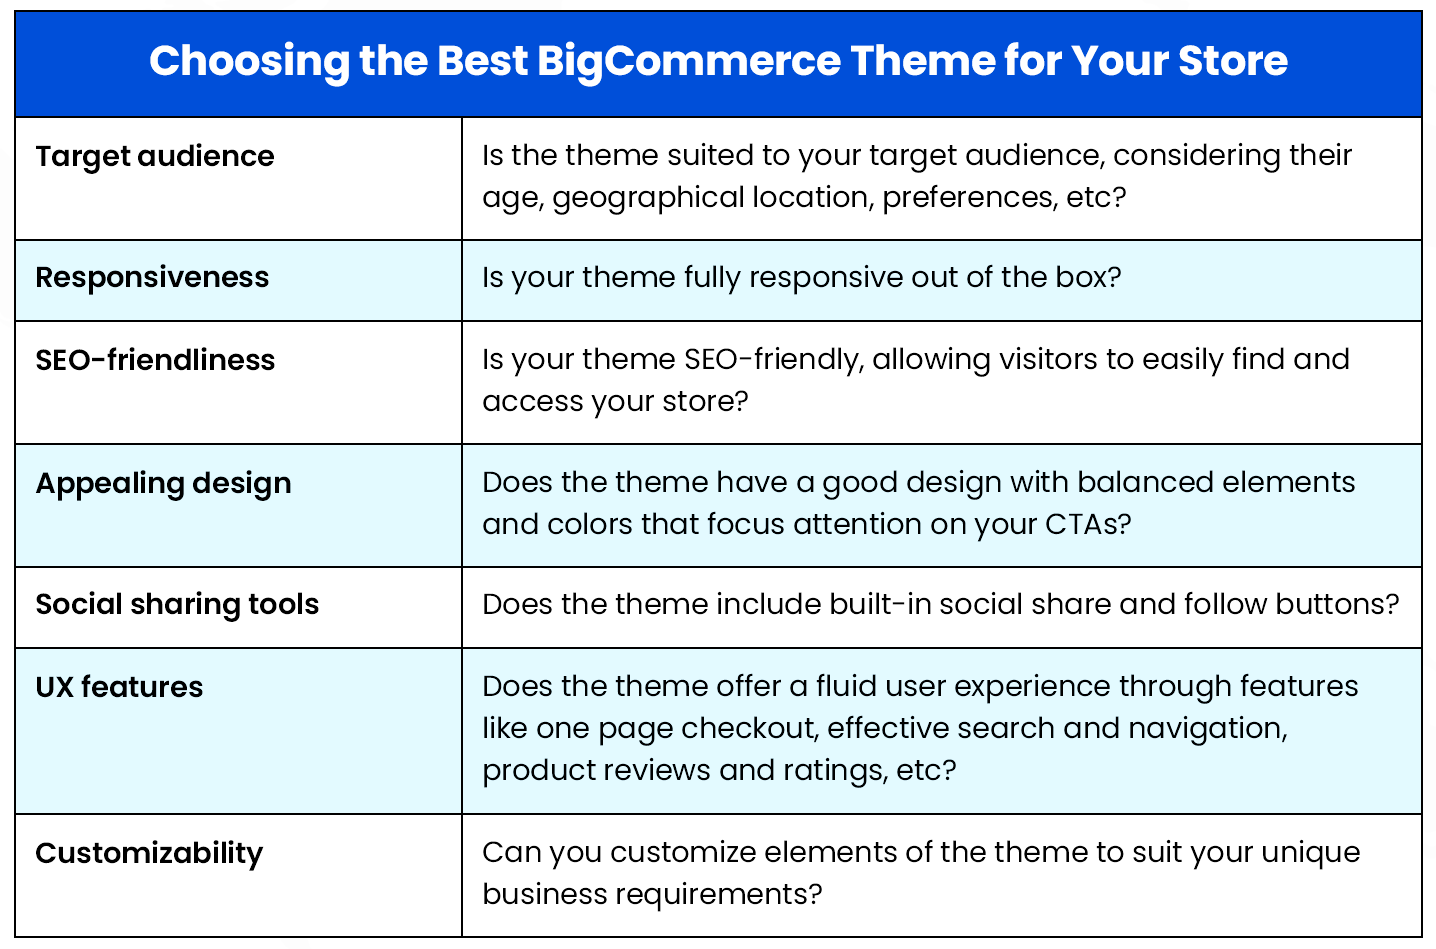 Choosing the Best BigCommerce Theme for Your Store